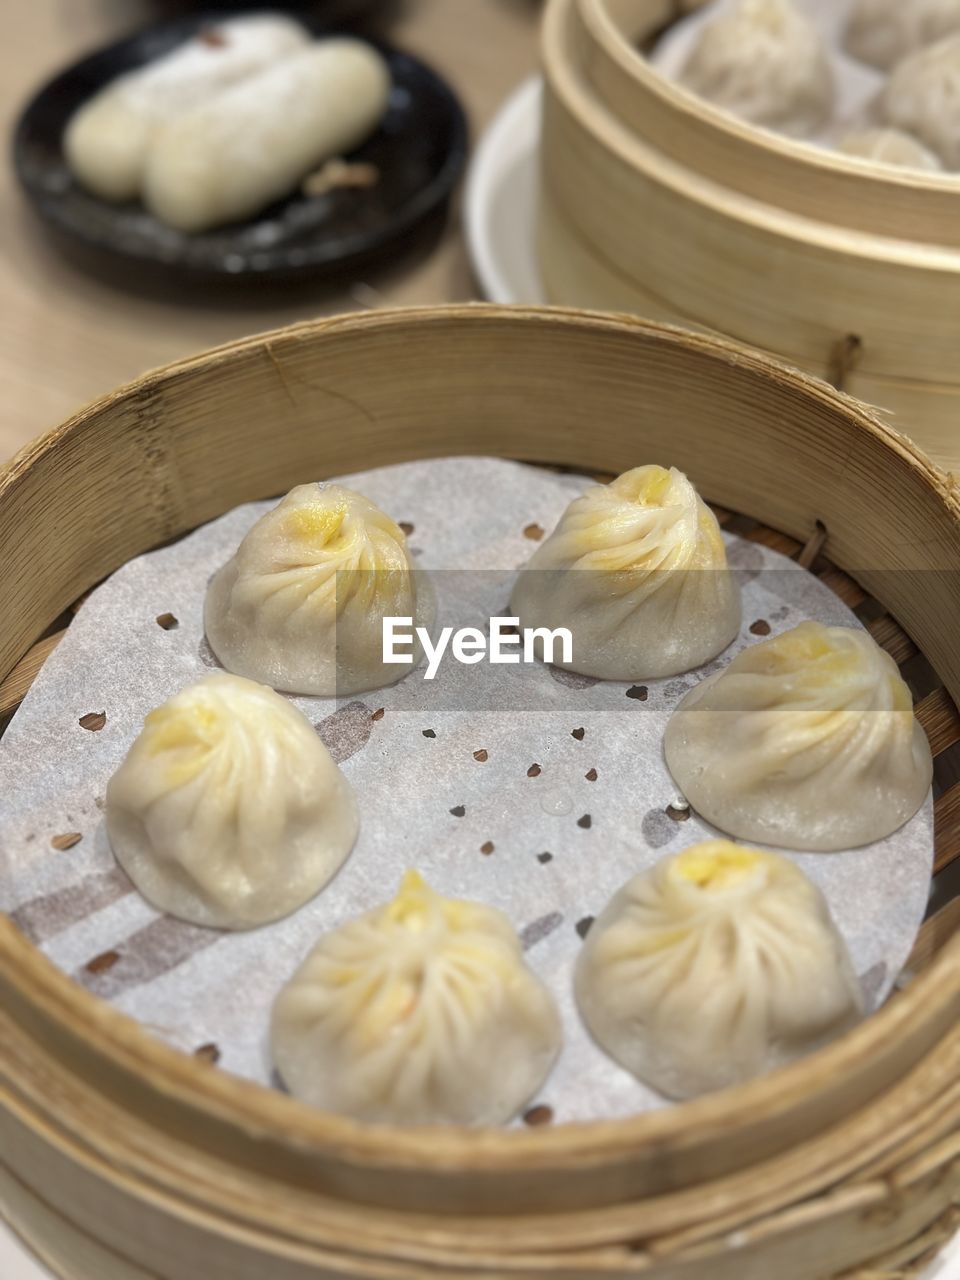 food, dim sum, xiaolongbao, food and drink, buuz, khinkali, dumpling, chinese food, chinese dumpling, manti, dish, mandu, freshness, asian food, steamed, wonton, healthy eating, cuisine, wellbeing, siopao, no people, shumai, indoors, container, pelmeni, still life, bamboo - material, ingredient, steam, meal, close-up